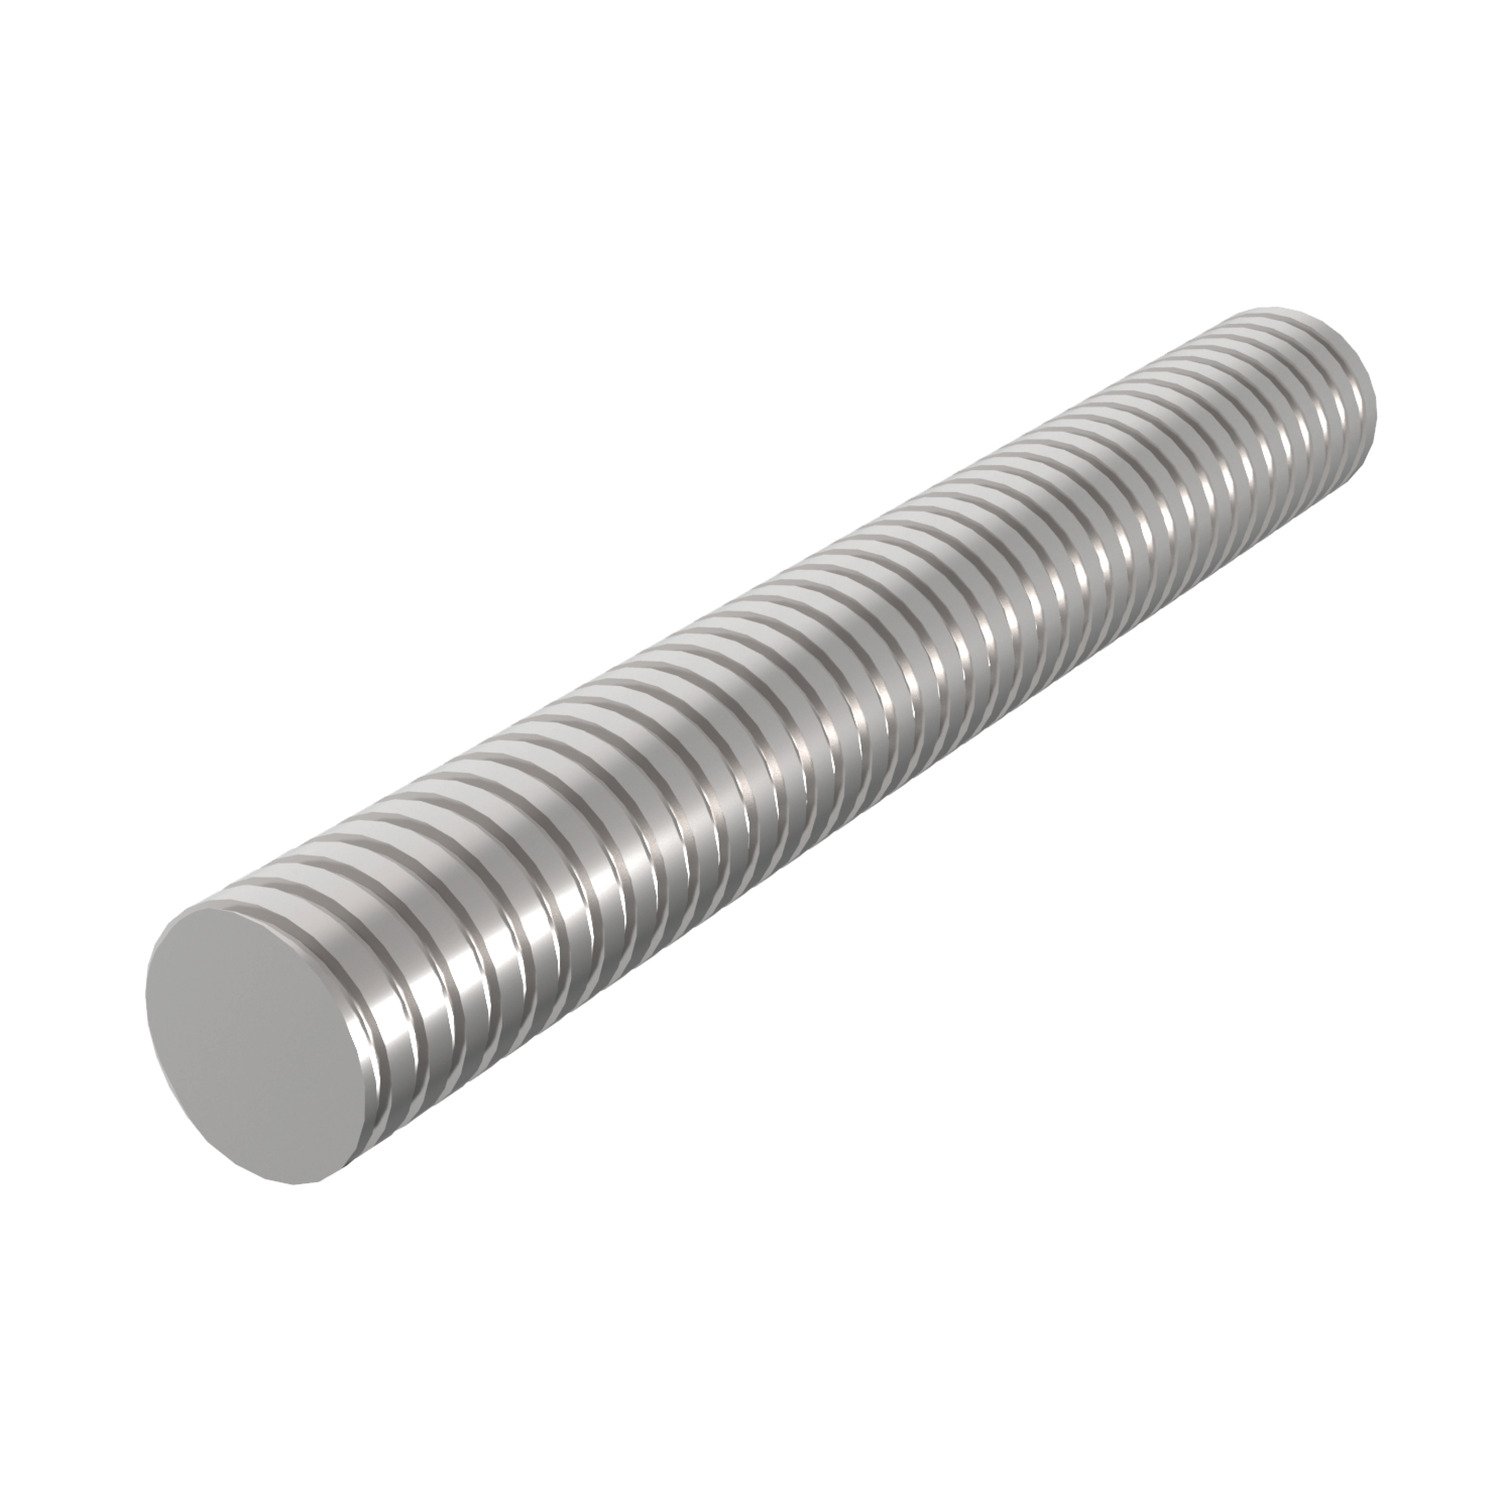 Stainless 304 Lead Screws Left hand thread. Rolled trapezoidal thread, stainless steel (AISI 304, A2)